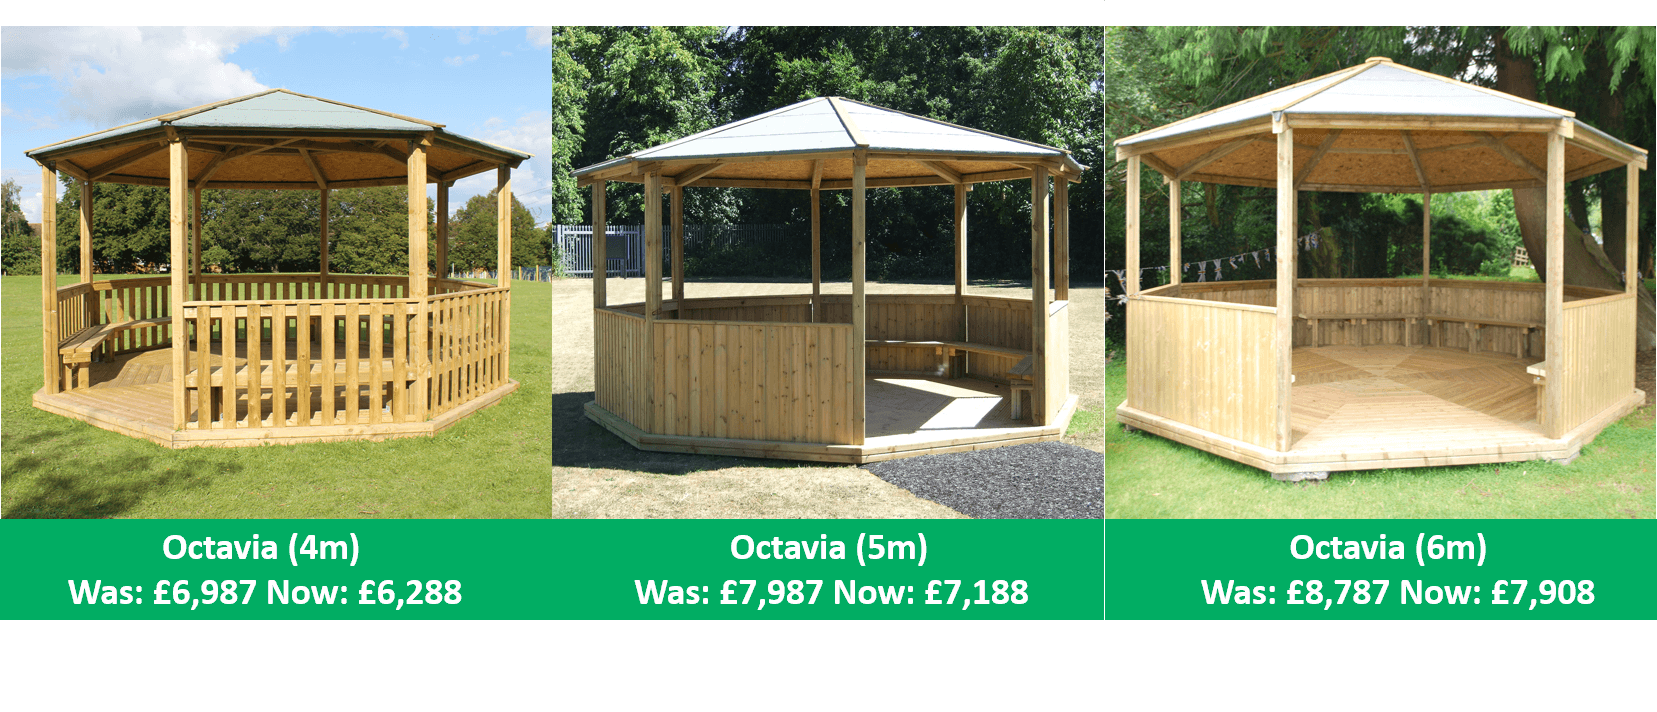 A Octavia | Grab 10% Off Our Outdoor Classrooms While You Can! - Outdoor Classroom Day Is Coming.... | Creative Play